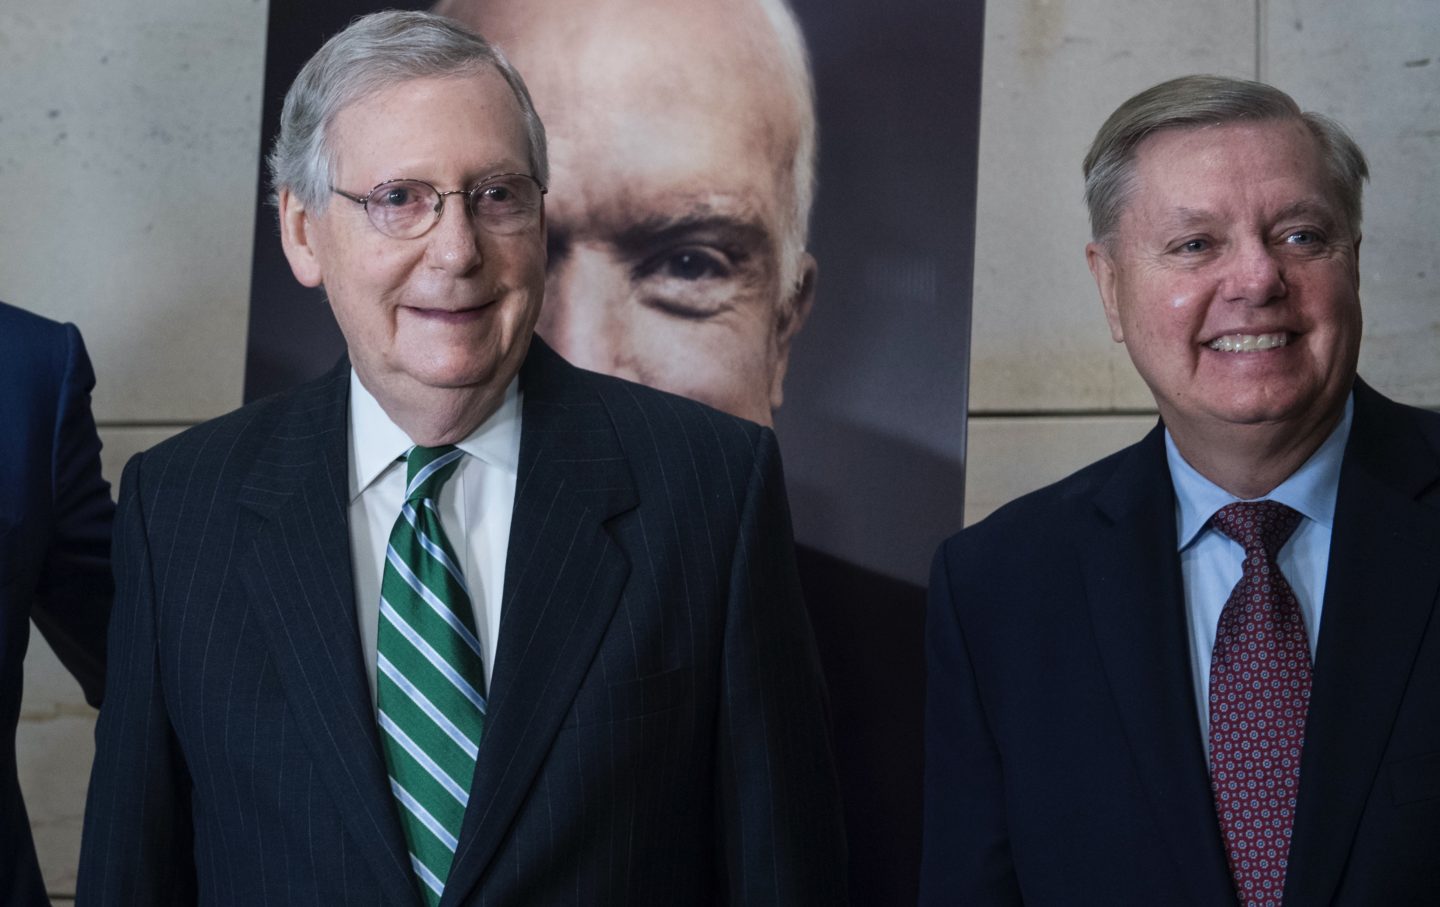 Mitch McConnell and Lindsey Graham Must Pay for Enabling Trump